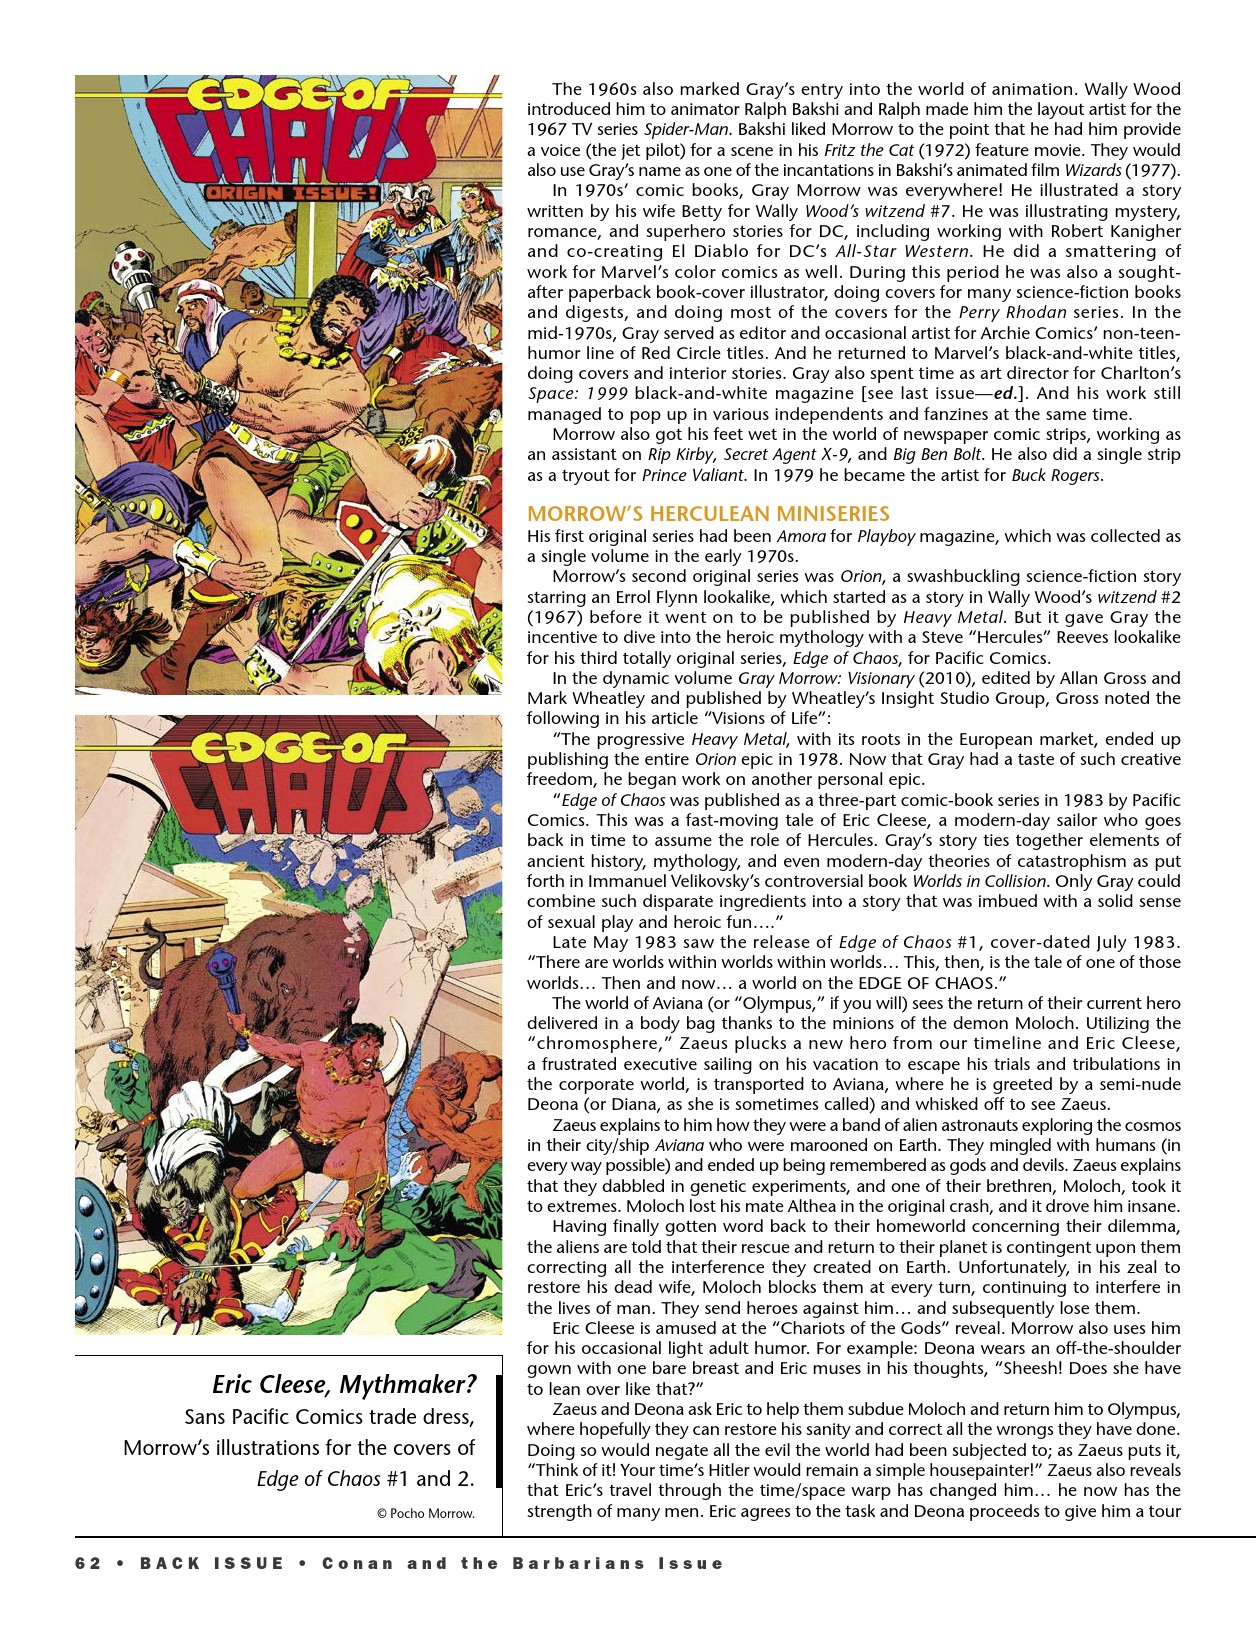 Read online Back Issue comic -  Issue #121 - 64